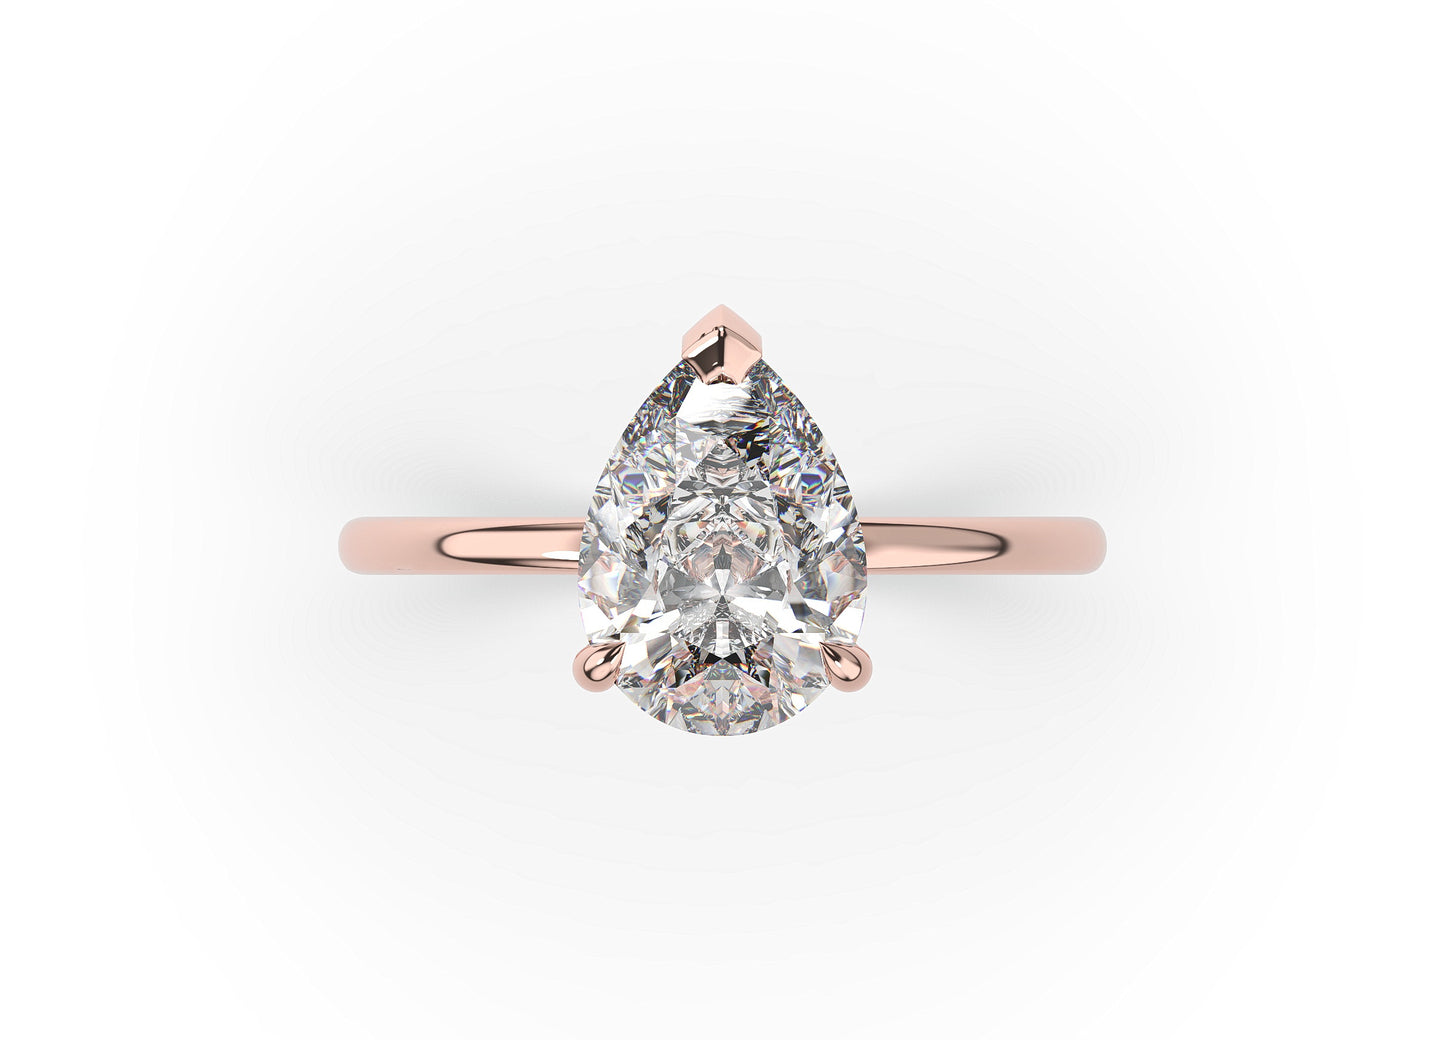 Pear Three Claw Thin Band Solitaire Engagement Ring